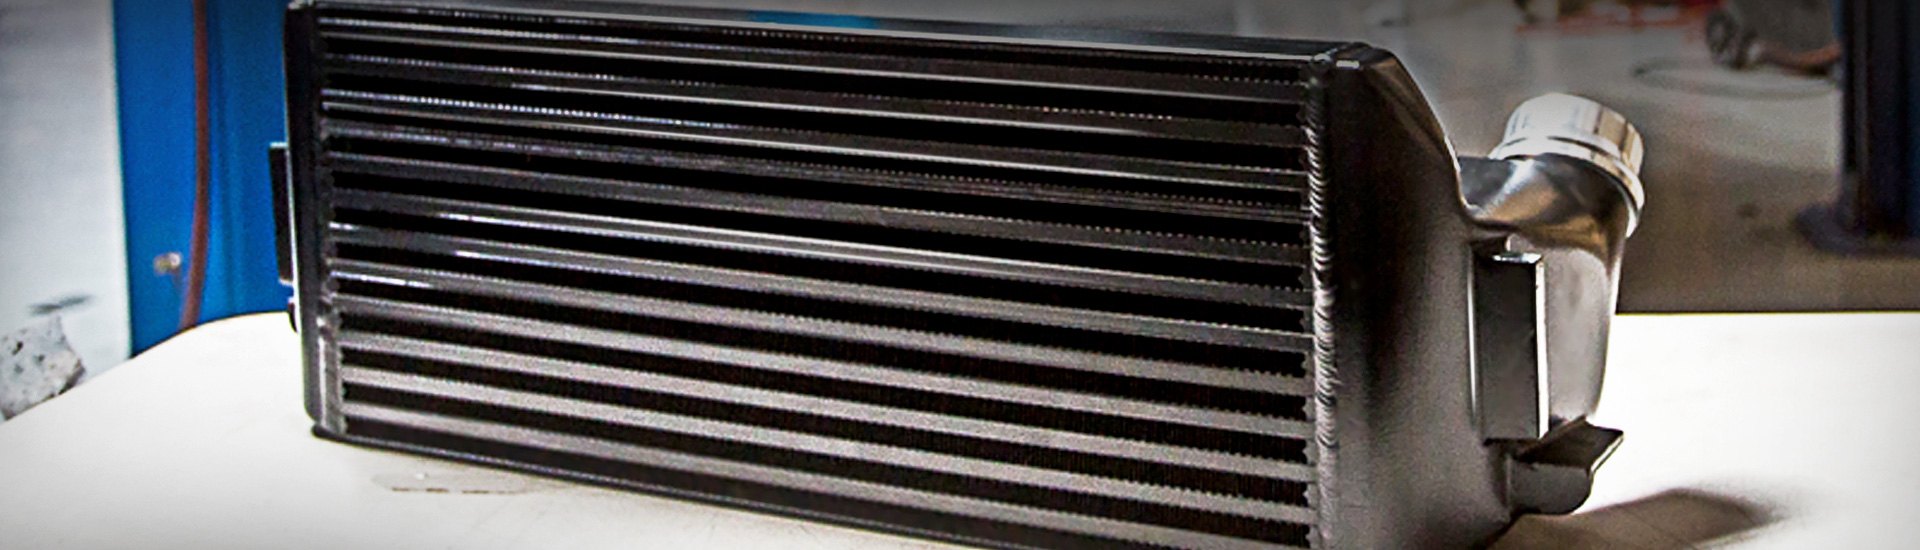 Keep It Cool: All-New Intercooler Upgrade for BMW F30/F32/F22/F87 by Agency Power